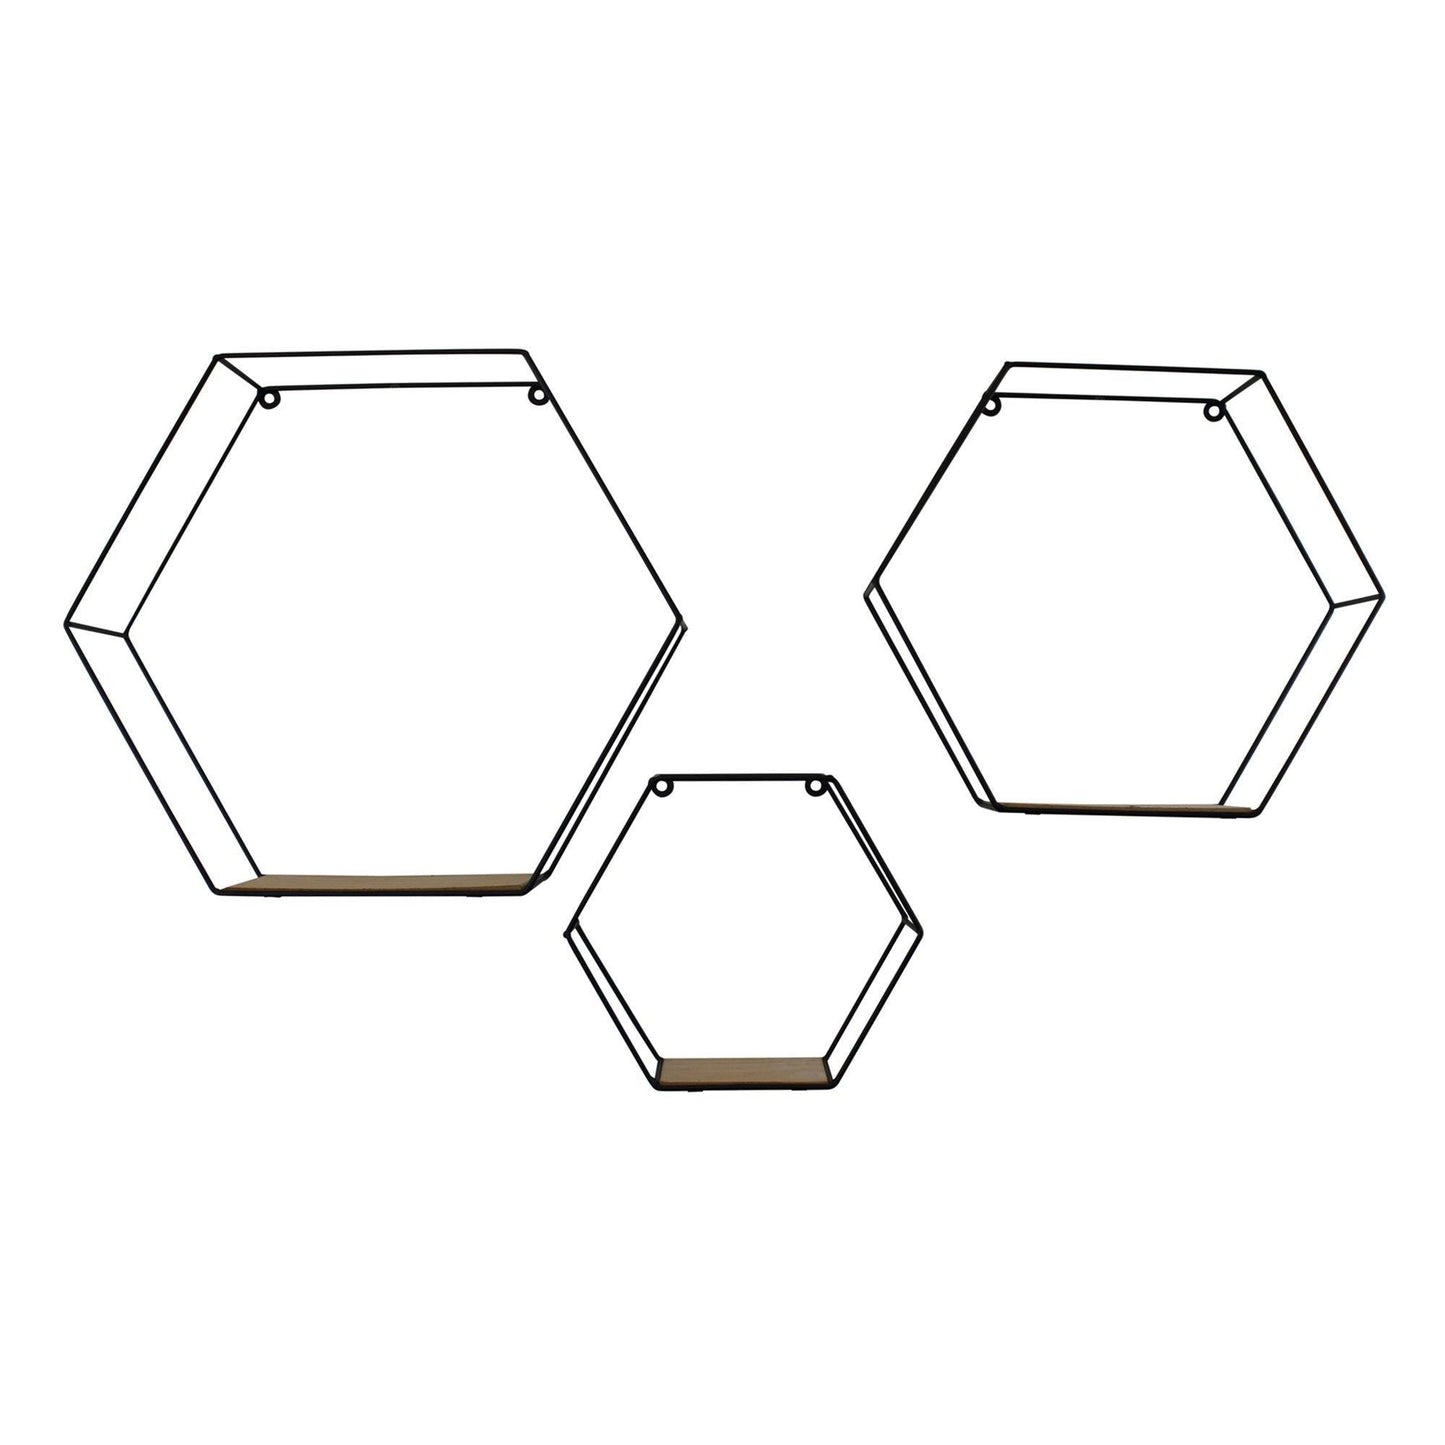 Set of Three Black Metal Hexagonal Wall Shelves with Wooden Shelf - Home Inspired Gifts